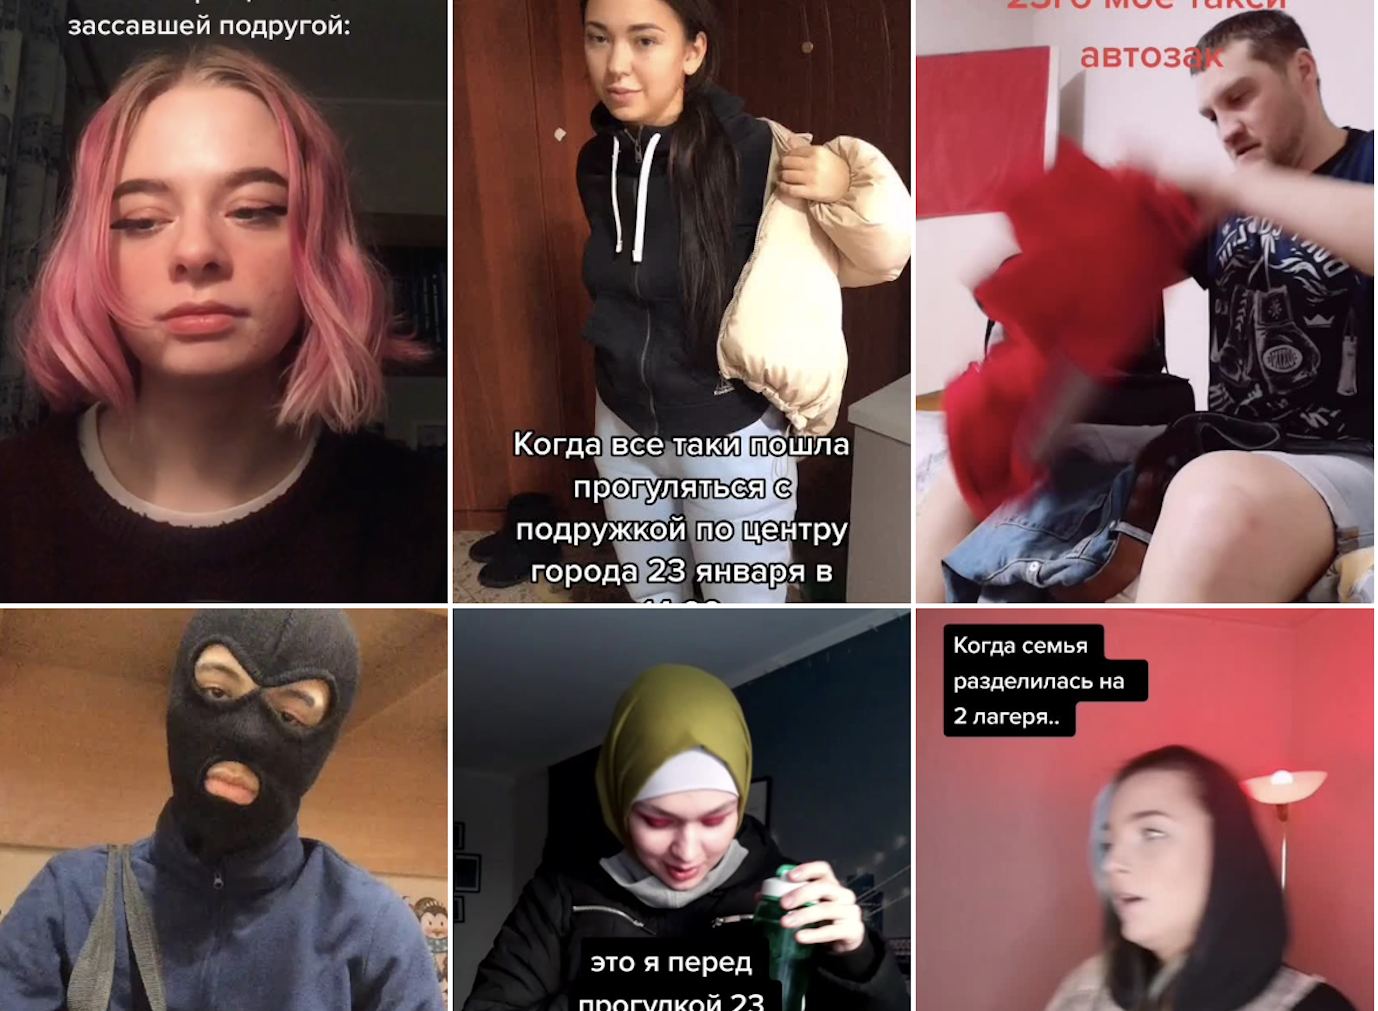 Tik Tok, Instagram, Youtube and VKontake delete Russians’ calls to protest 